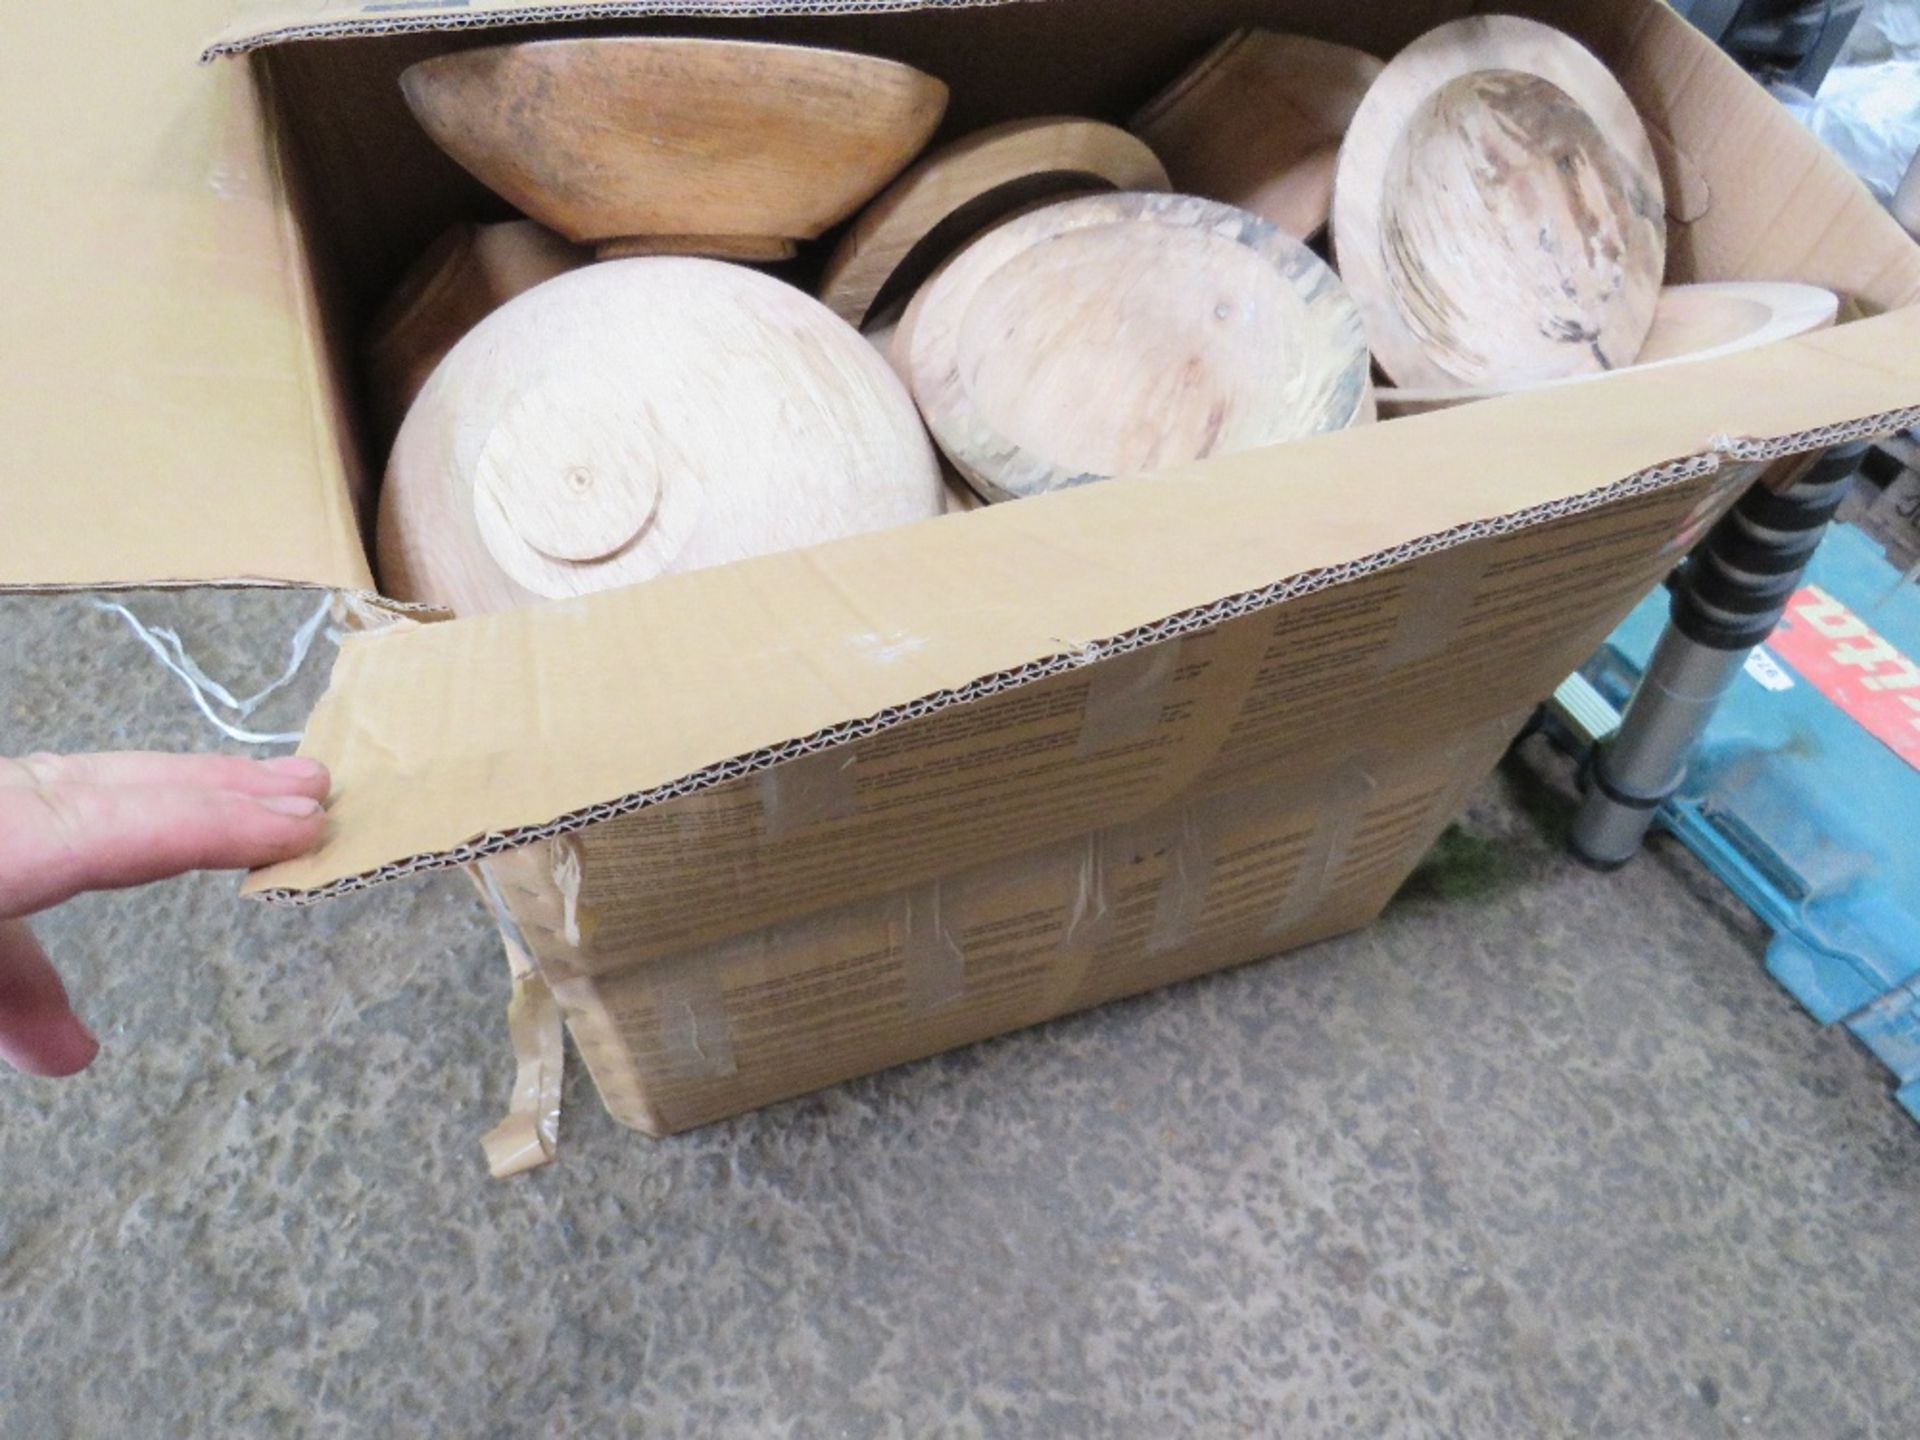 2 X BOXES CONTAINING TURNED WOODEN BOWL BLANKS. OWNER NO LONGER HAS THE TIME TO FINISH THEM. THI